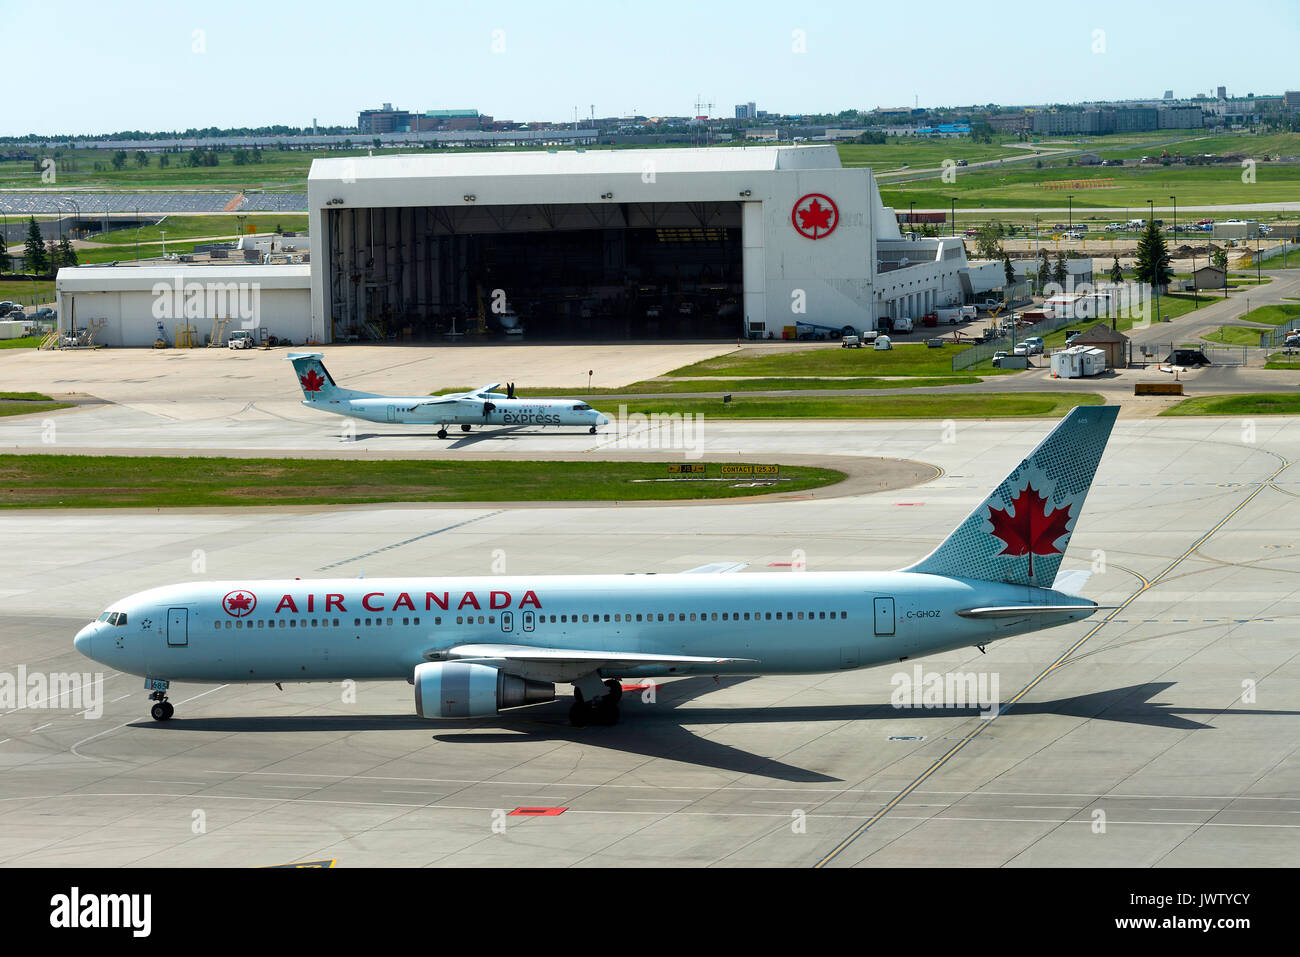 Air Canada Airline Boeing 767-375ER Airliner C-GHOZ Taxiing on Arrival at Calgary International Airport Alberta Canada Stock Photo